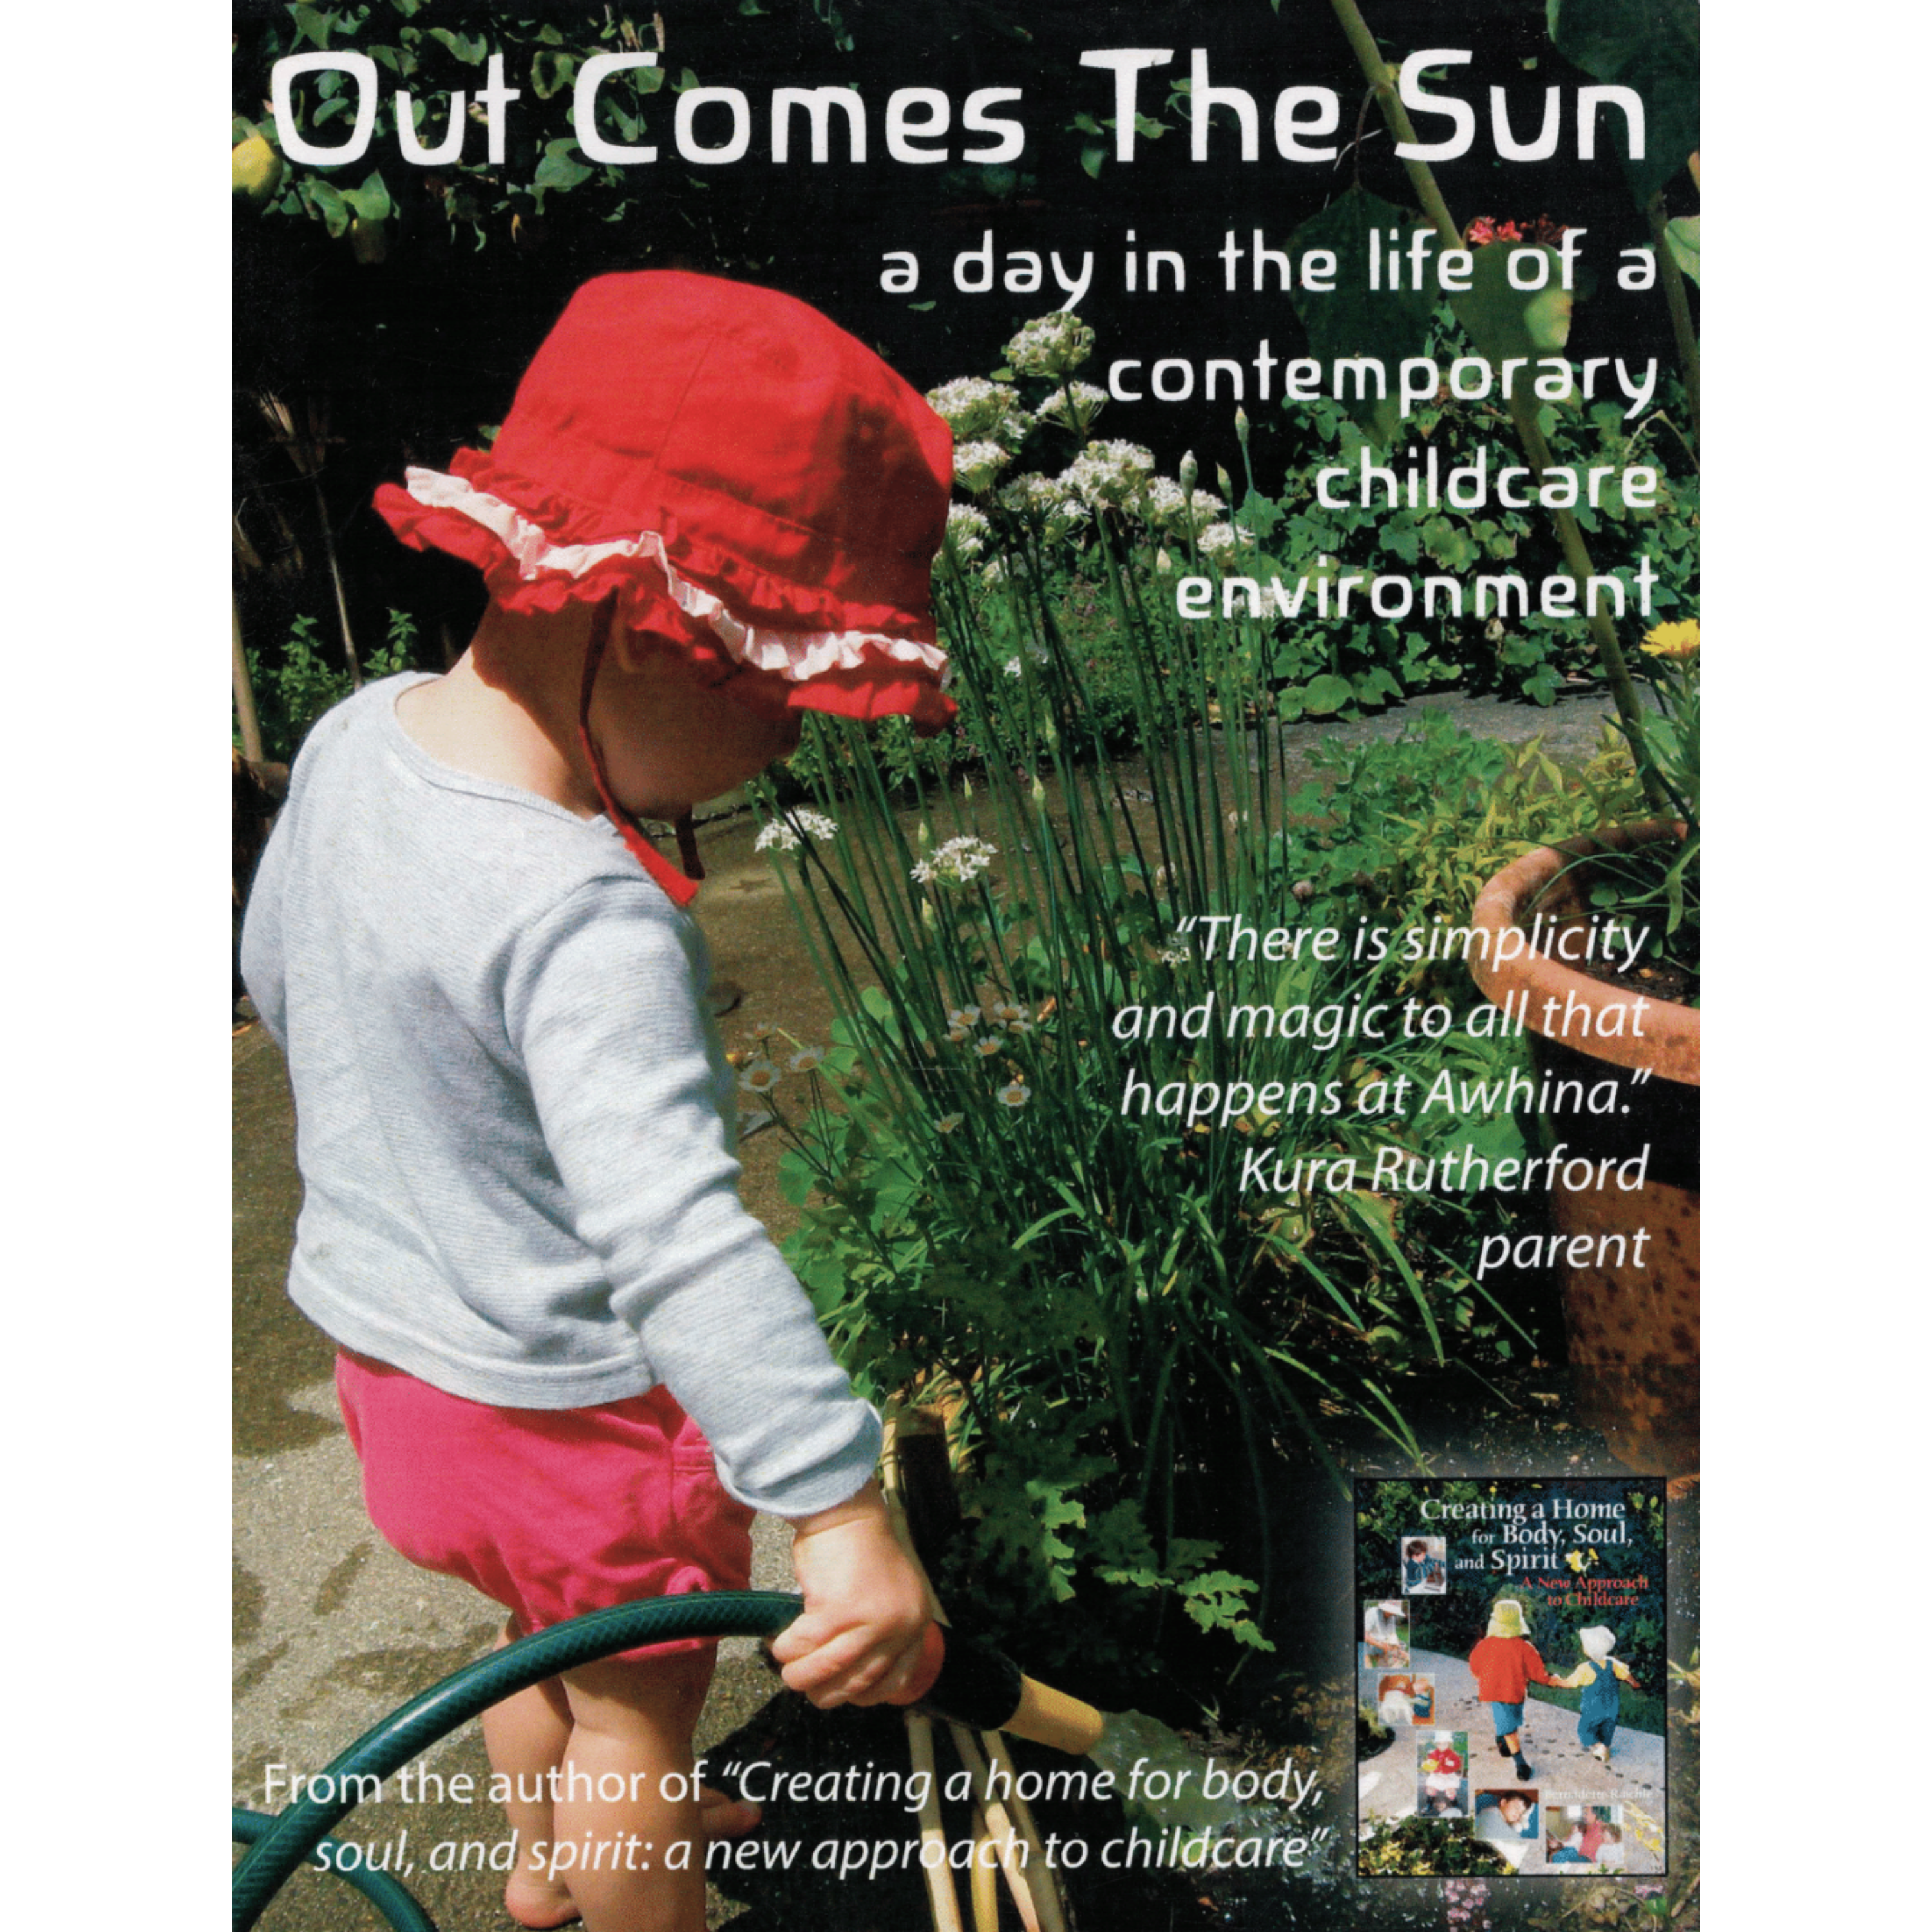 Out Comes the Sun: A day in the life of a contemporary childcare environment